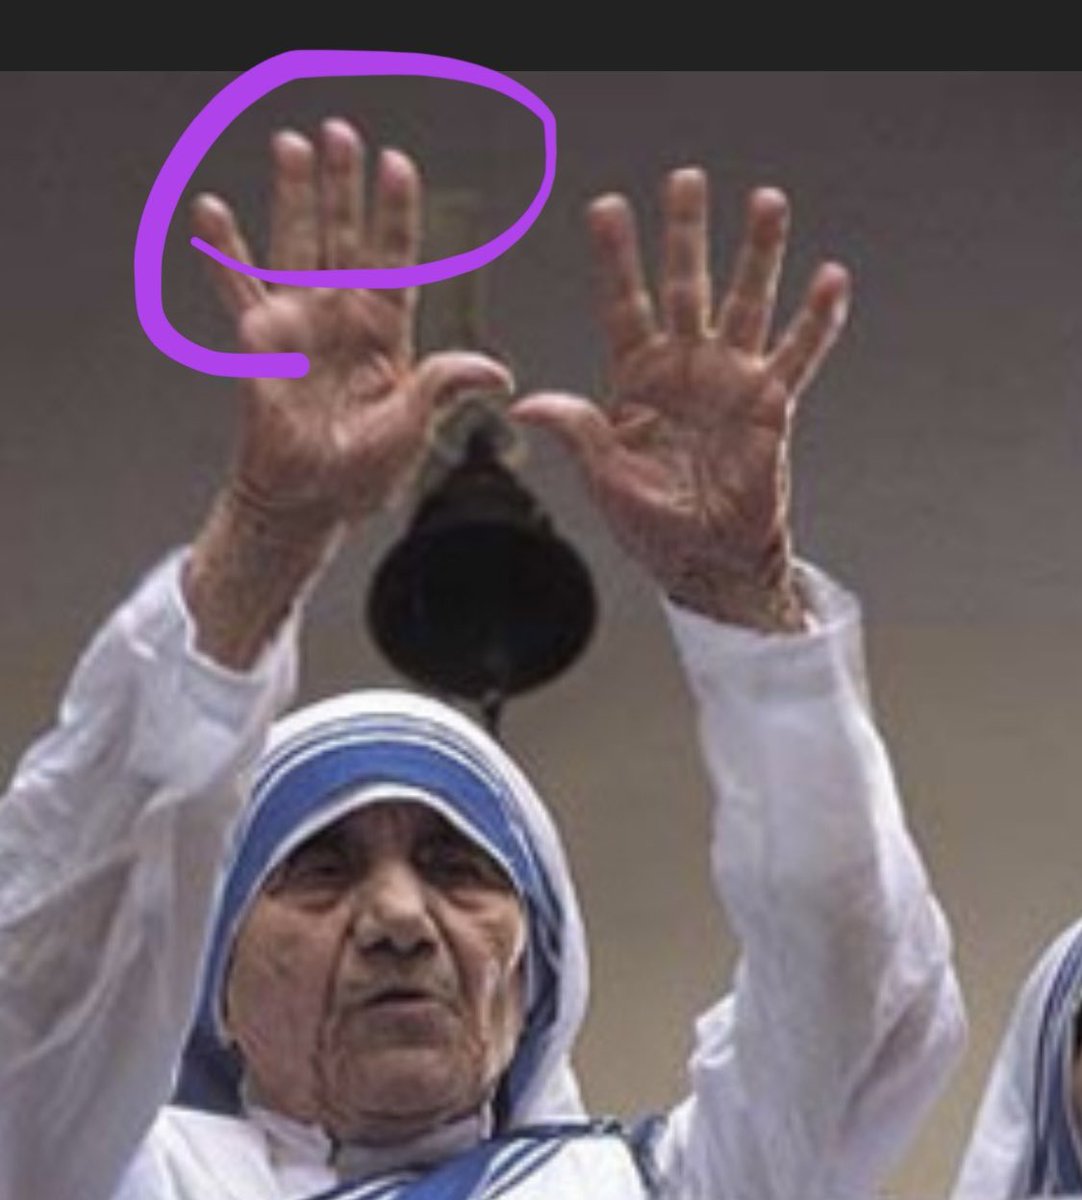 @QPATRIOTMLO1 Yes, GONE 
Same with his Father #MotherTeresa IS A MAN
If the ring ginger is longer than the index finger = MAN 
Both WERE #pedos #satanicworship #HumanTrafficking #sodomy #PureEvil